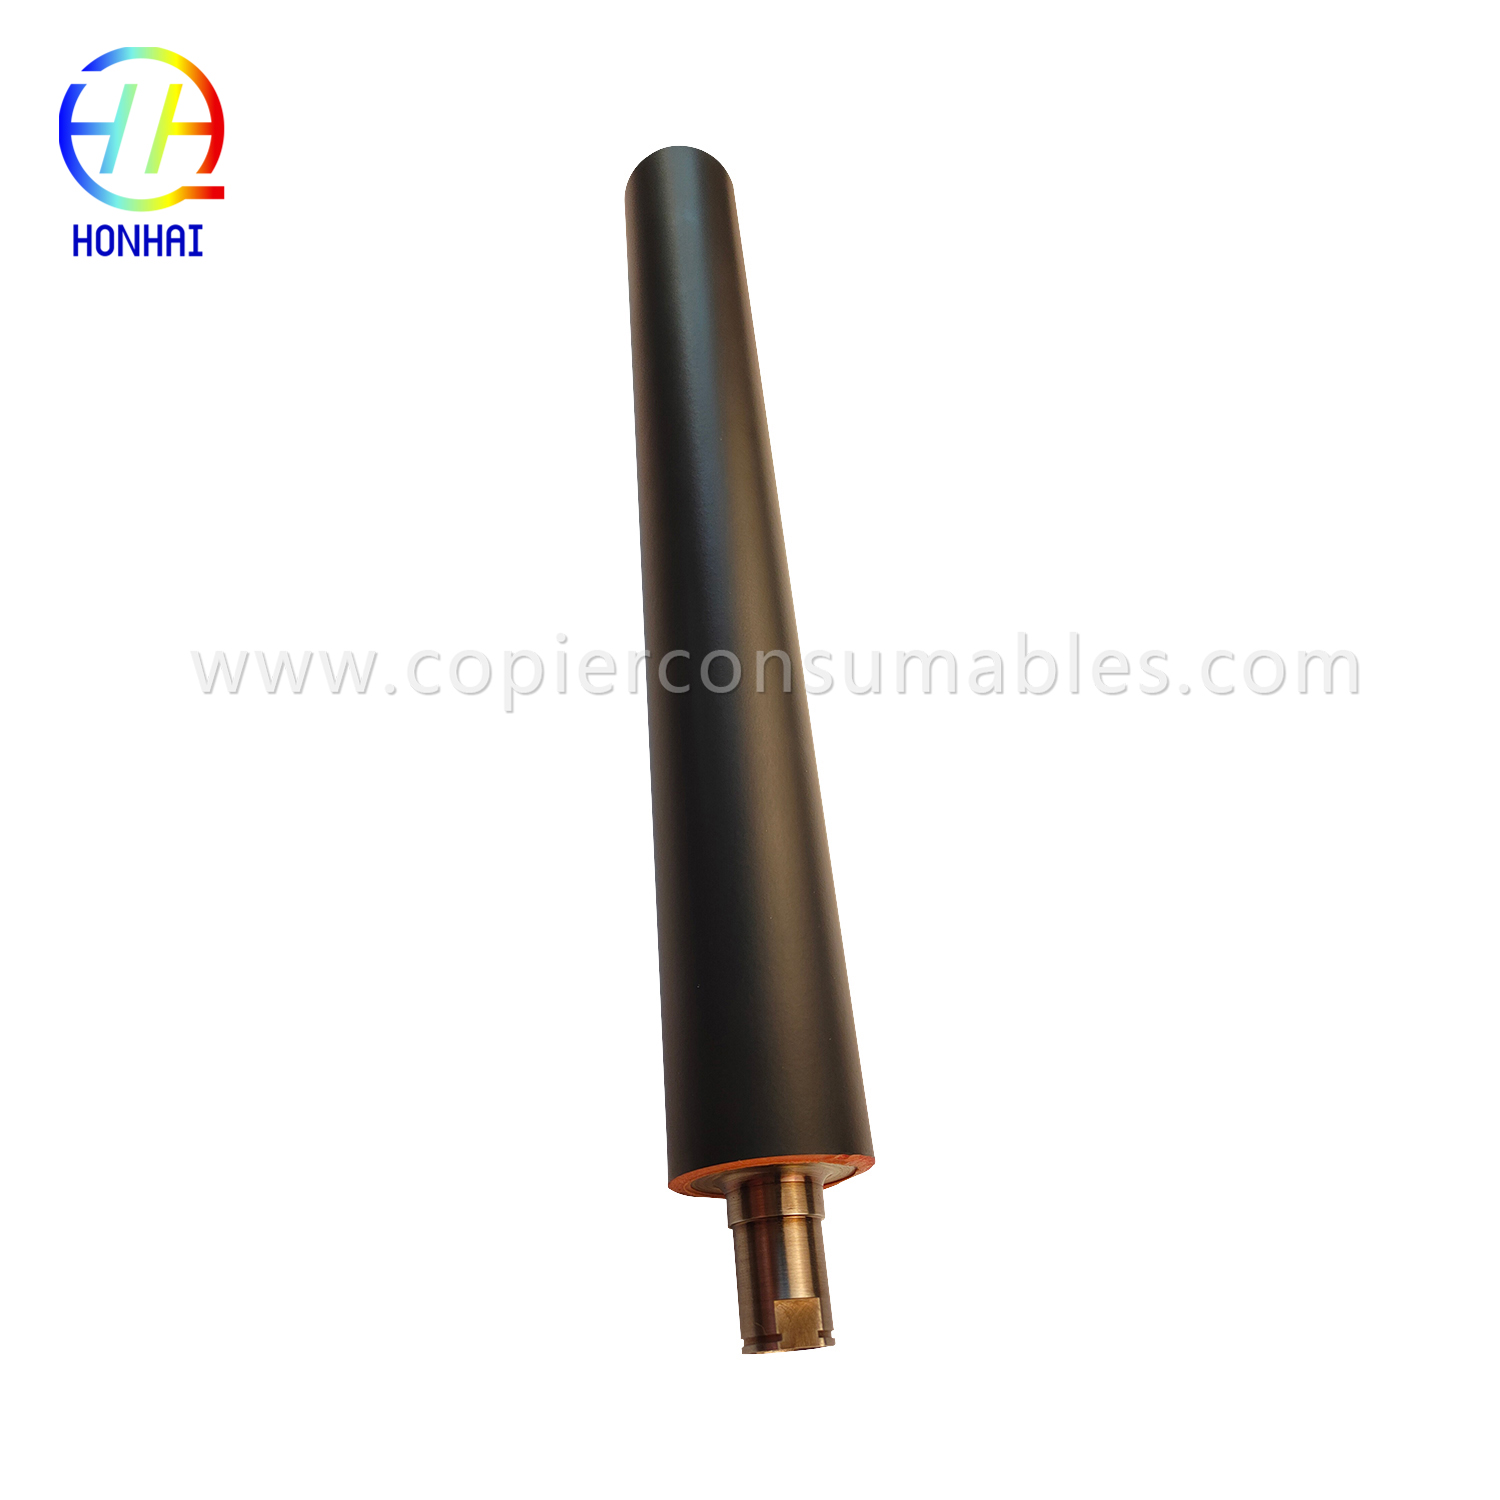 Pressure-Roller-For-Ricoh-Mpc4501-Mpc5501-Mp-C4501-C5501-Ae020183-Ae02-0183-Lower-Sleeved-Pressure-Roller(6) 拷贝